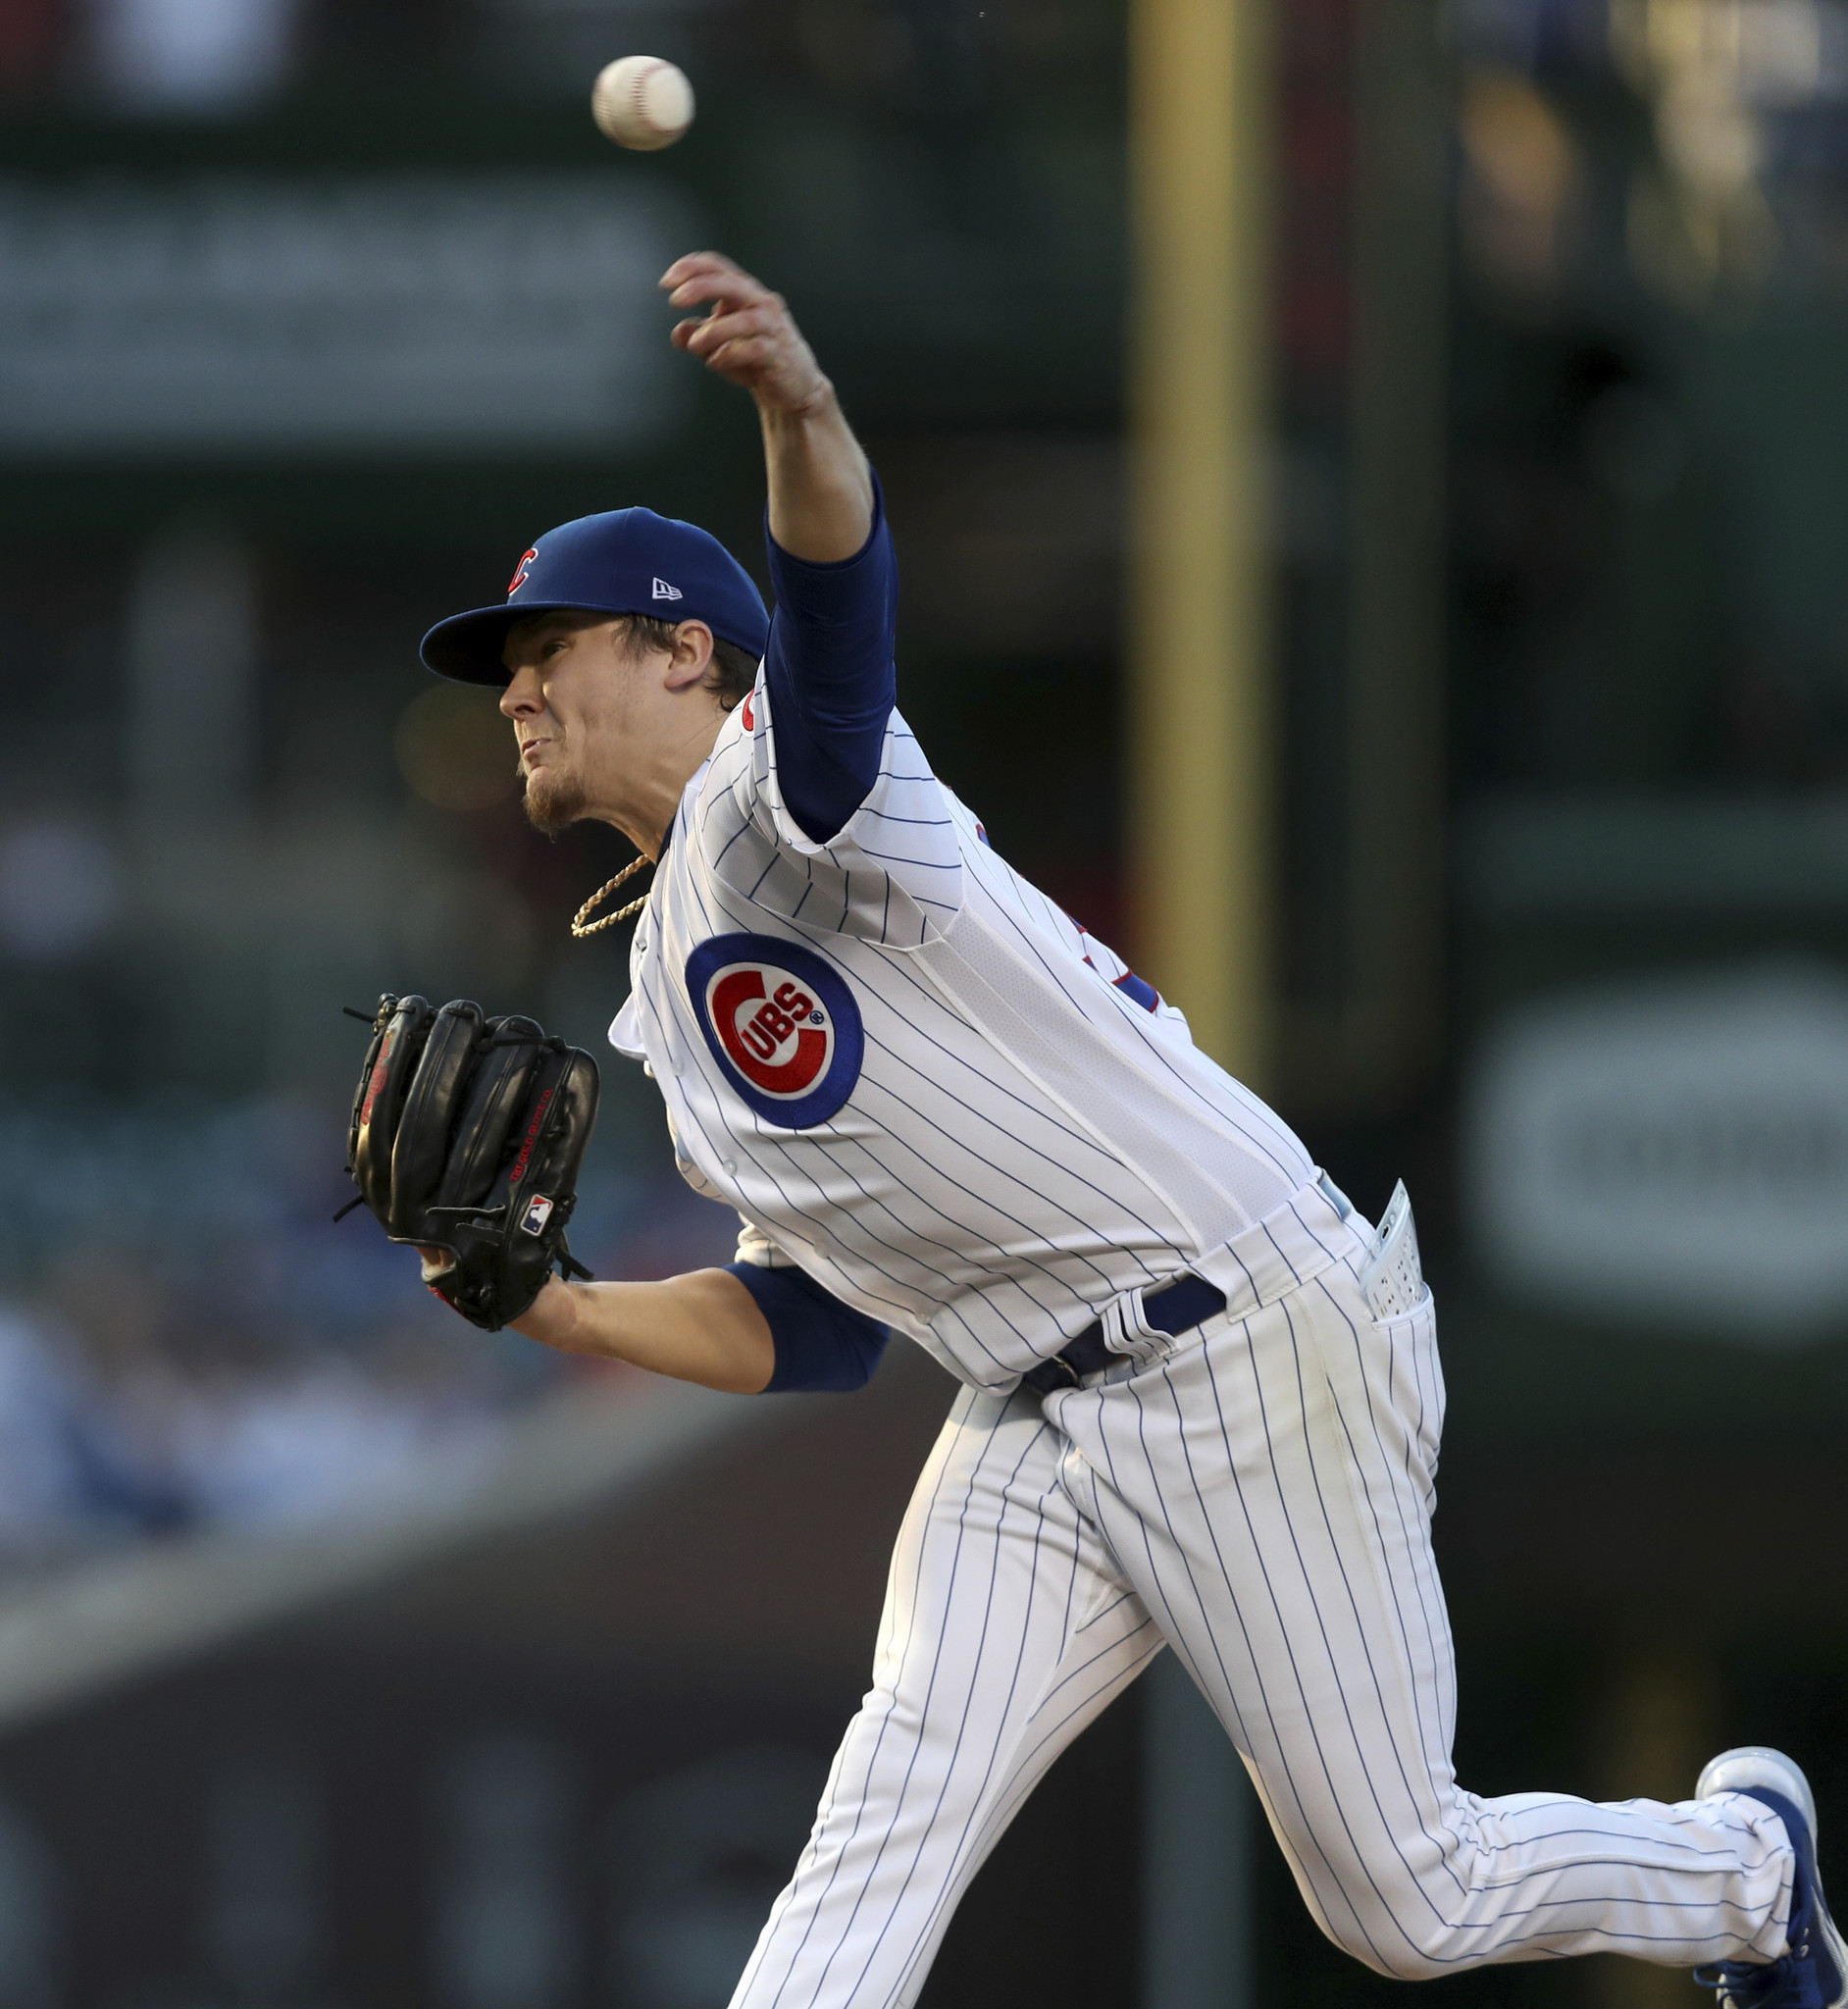 Chicago Cubs coast connection strong thanks to Passeau, Steele